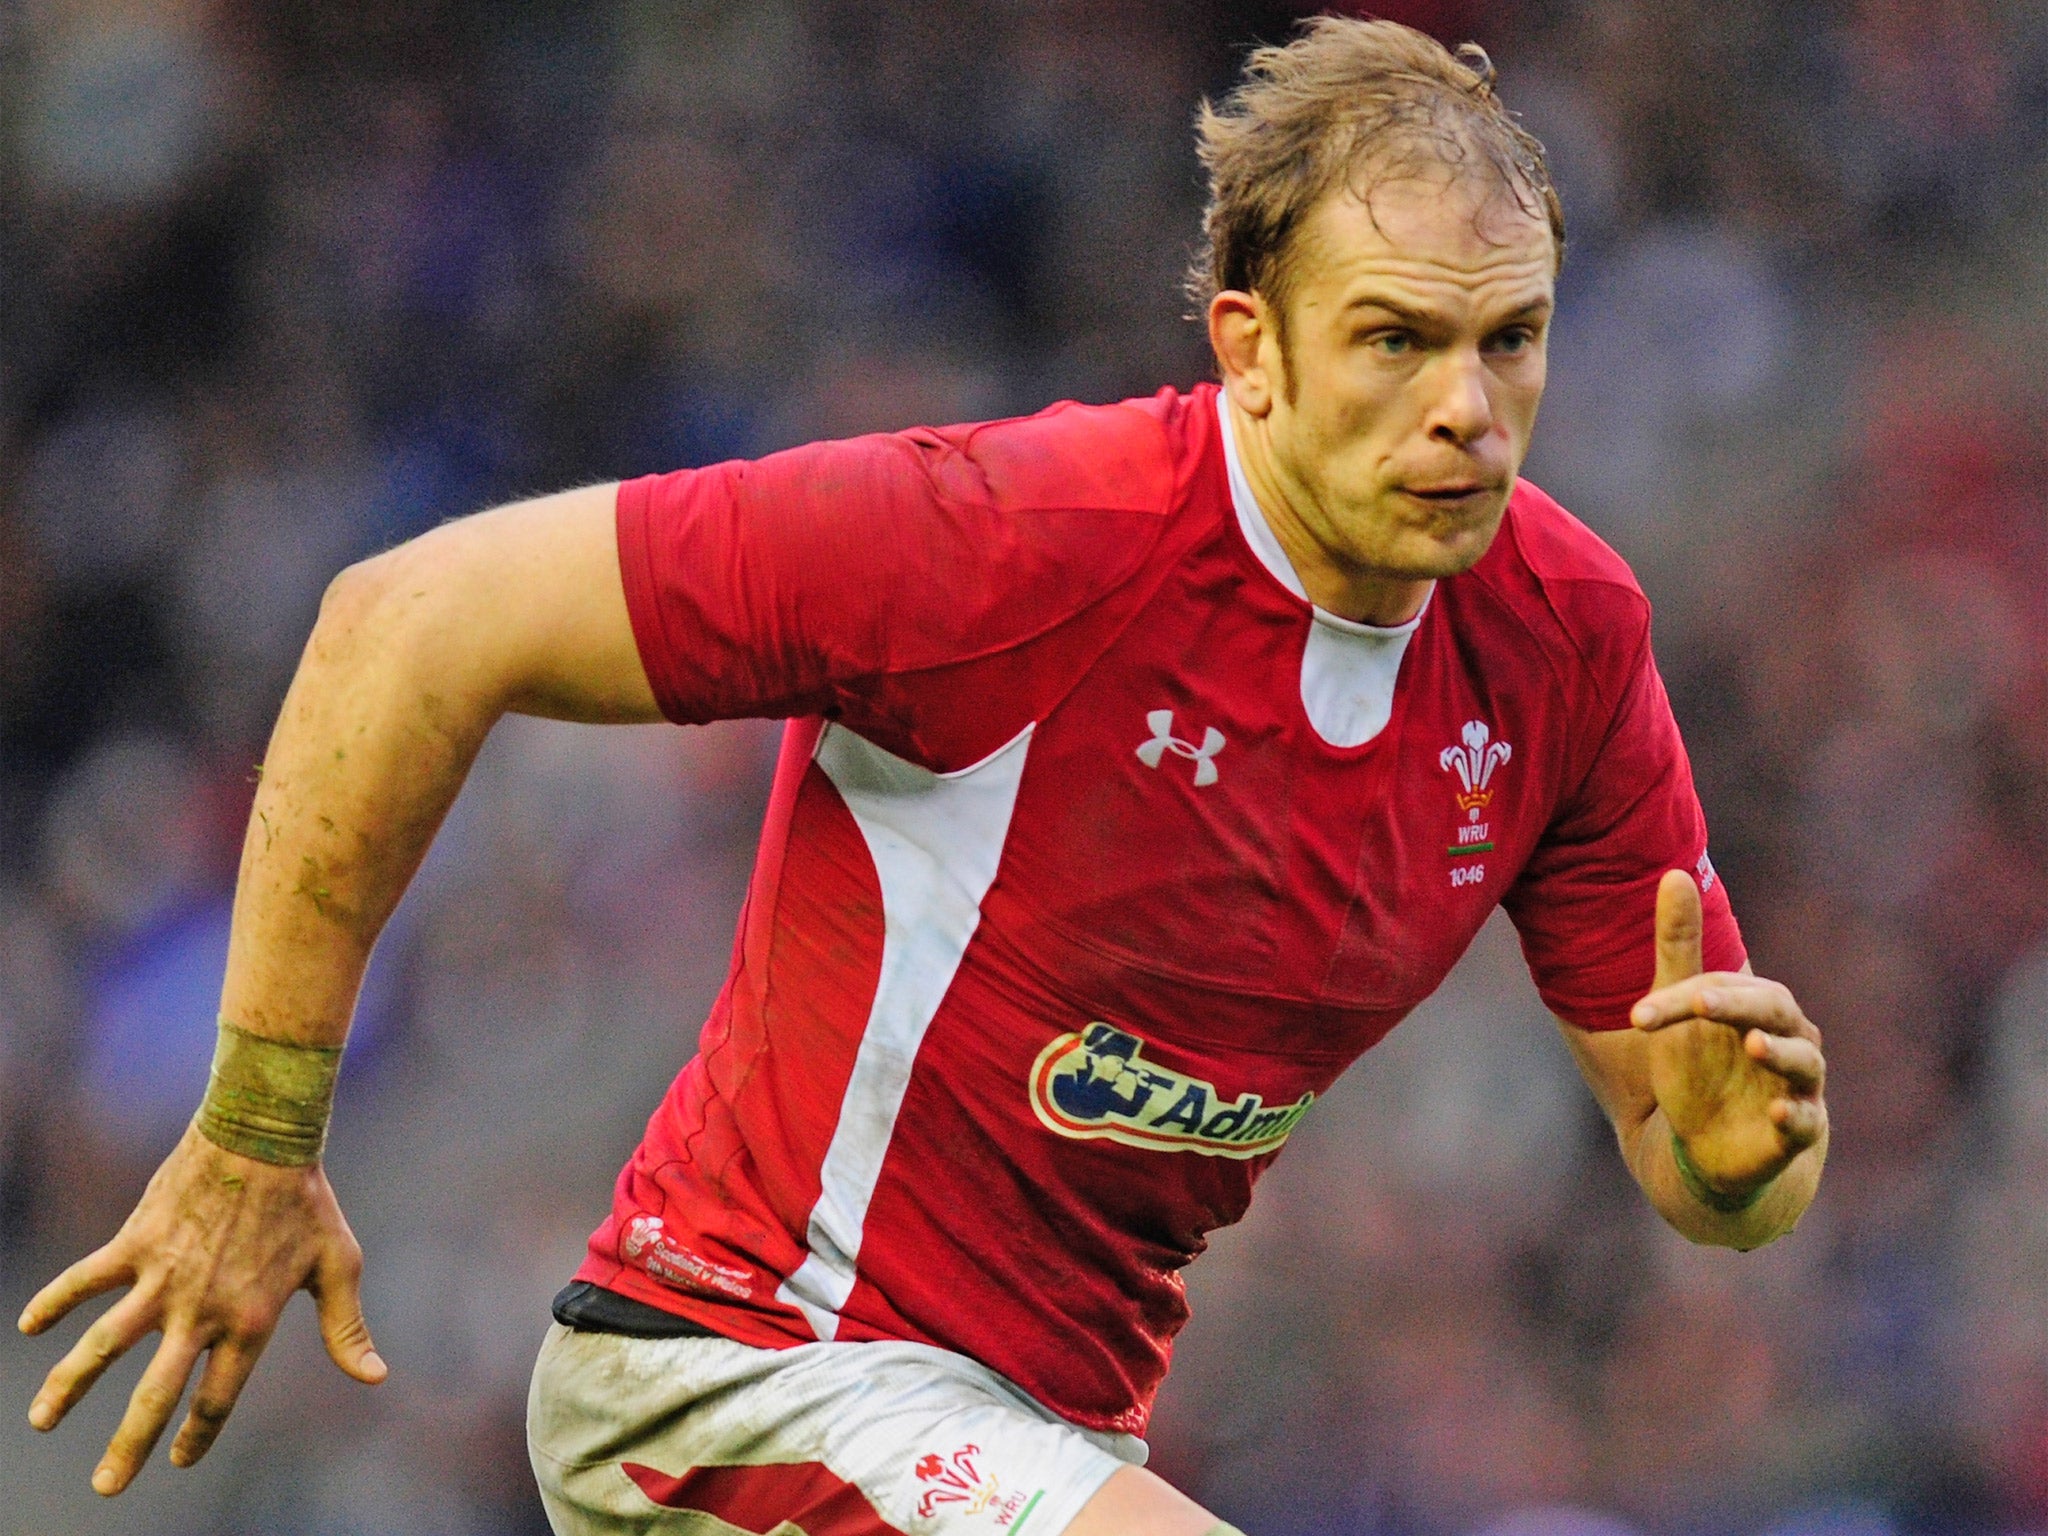 An impressive display against Scotland lifts Alun Wyn Jones’s chance to lead his country